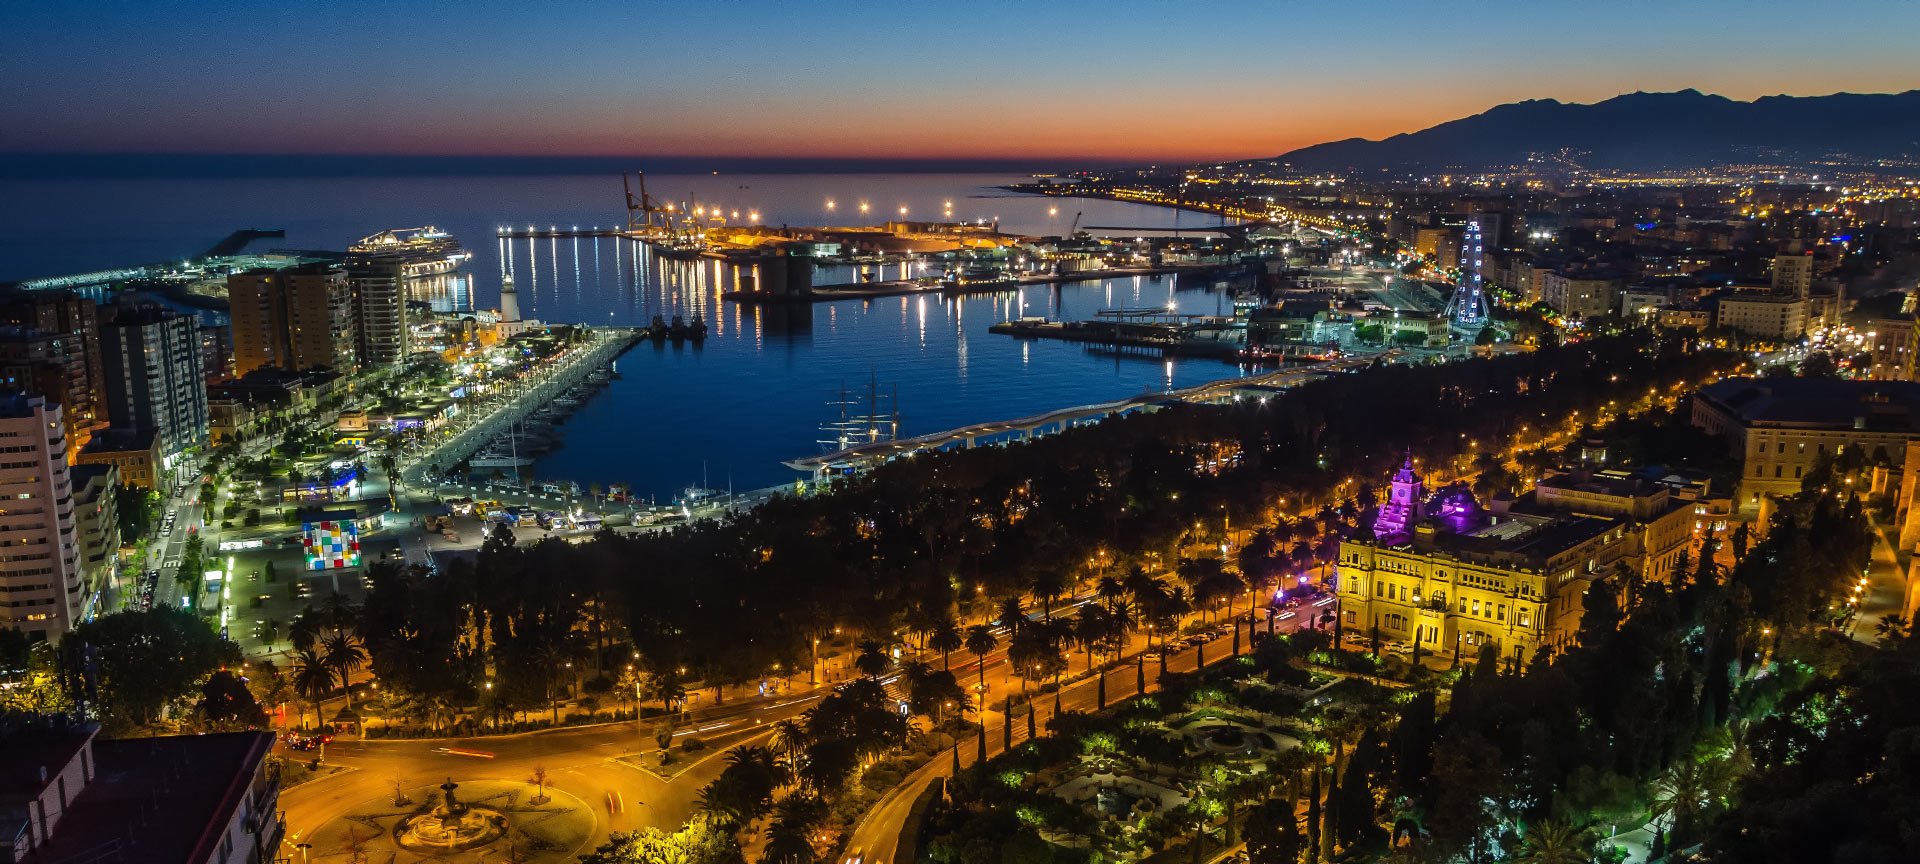 Night view of the port in Malaga